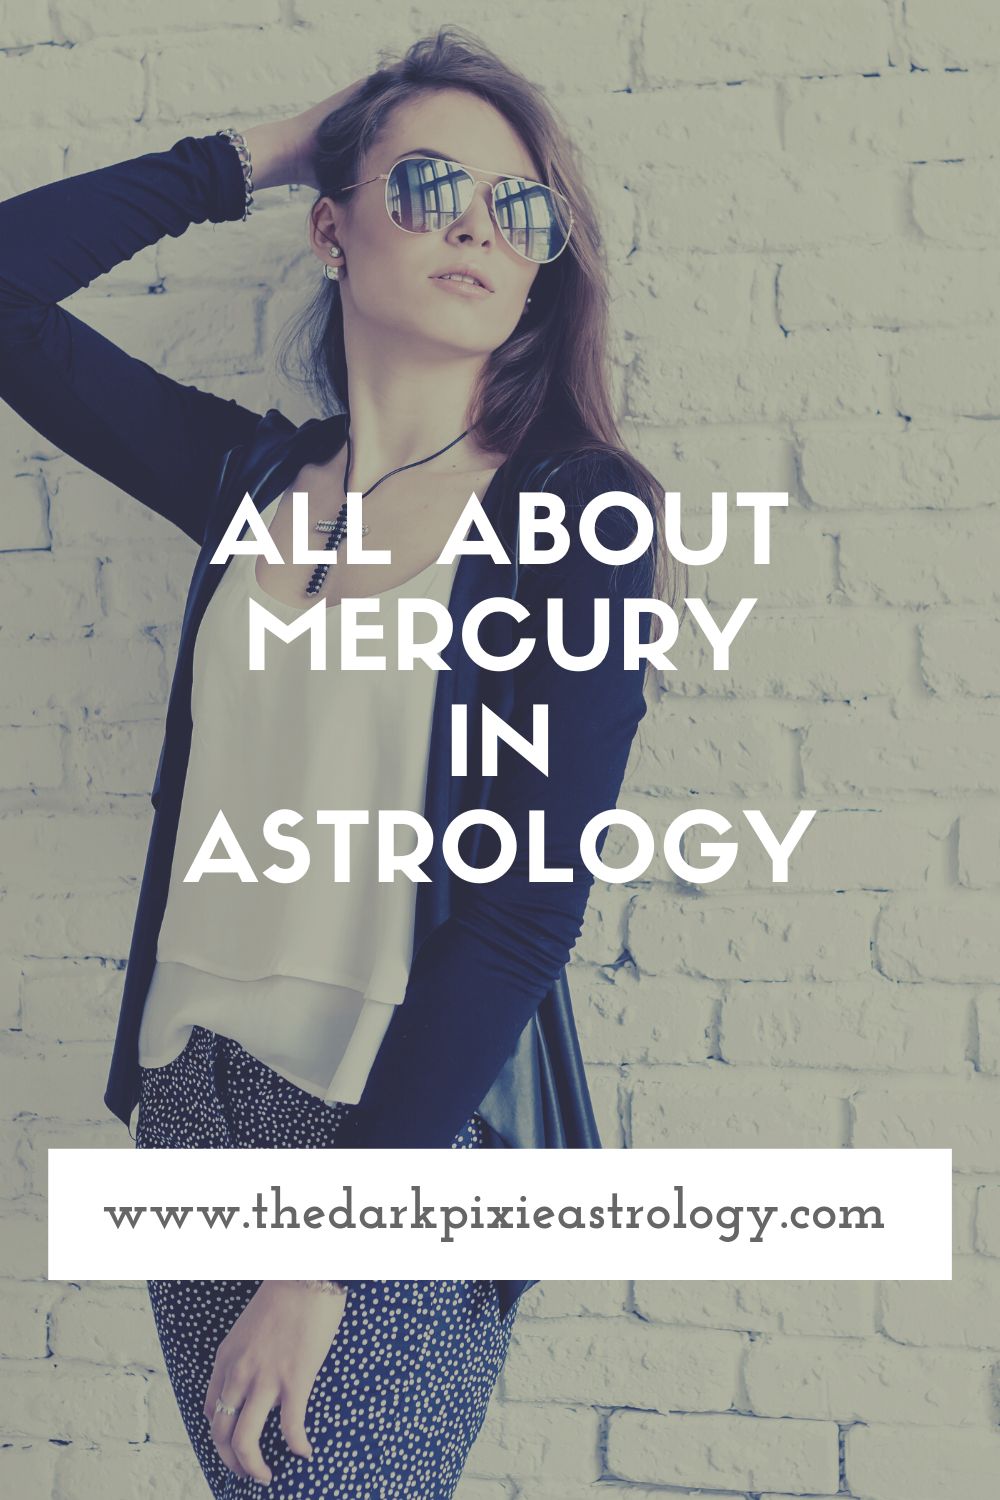 All About Mercury in Astrology - The Dark Pixie Astrology